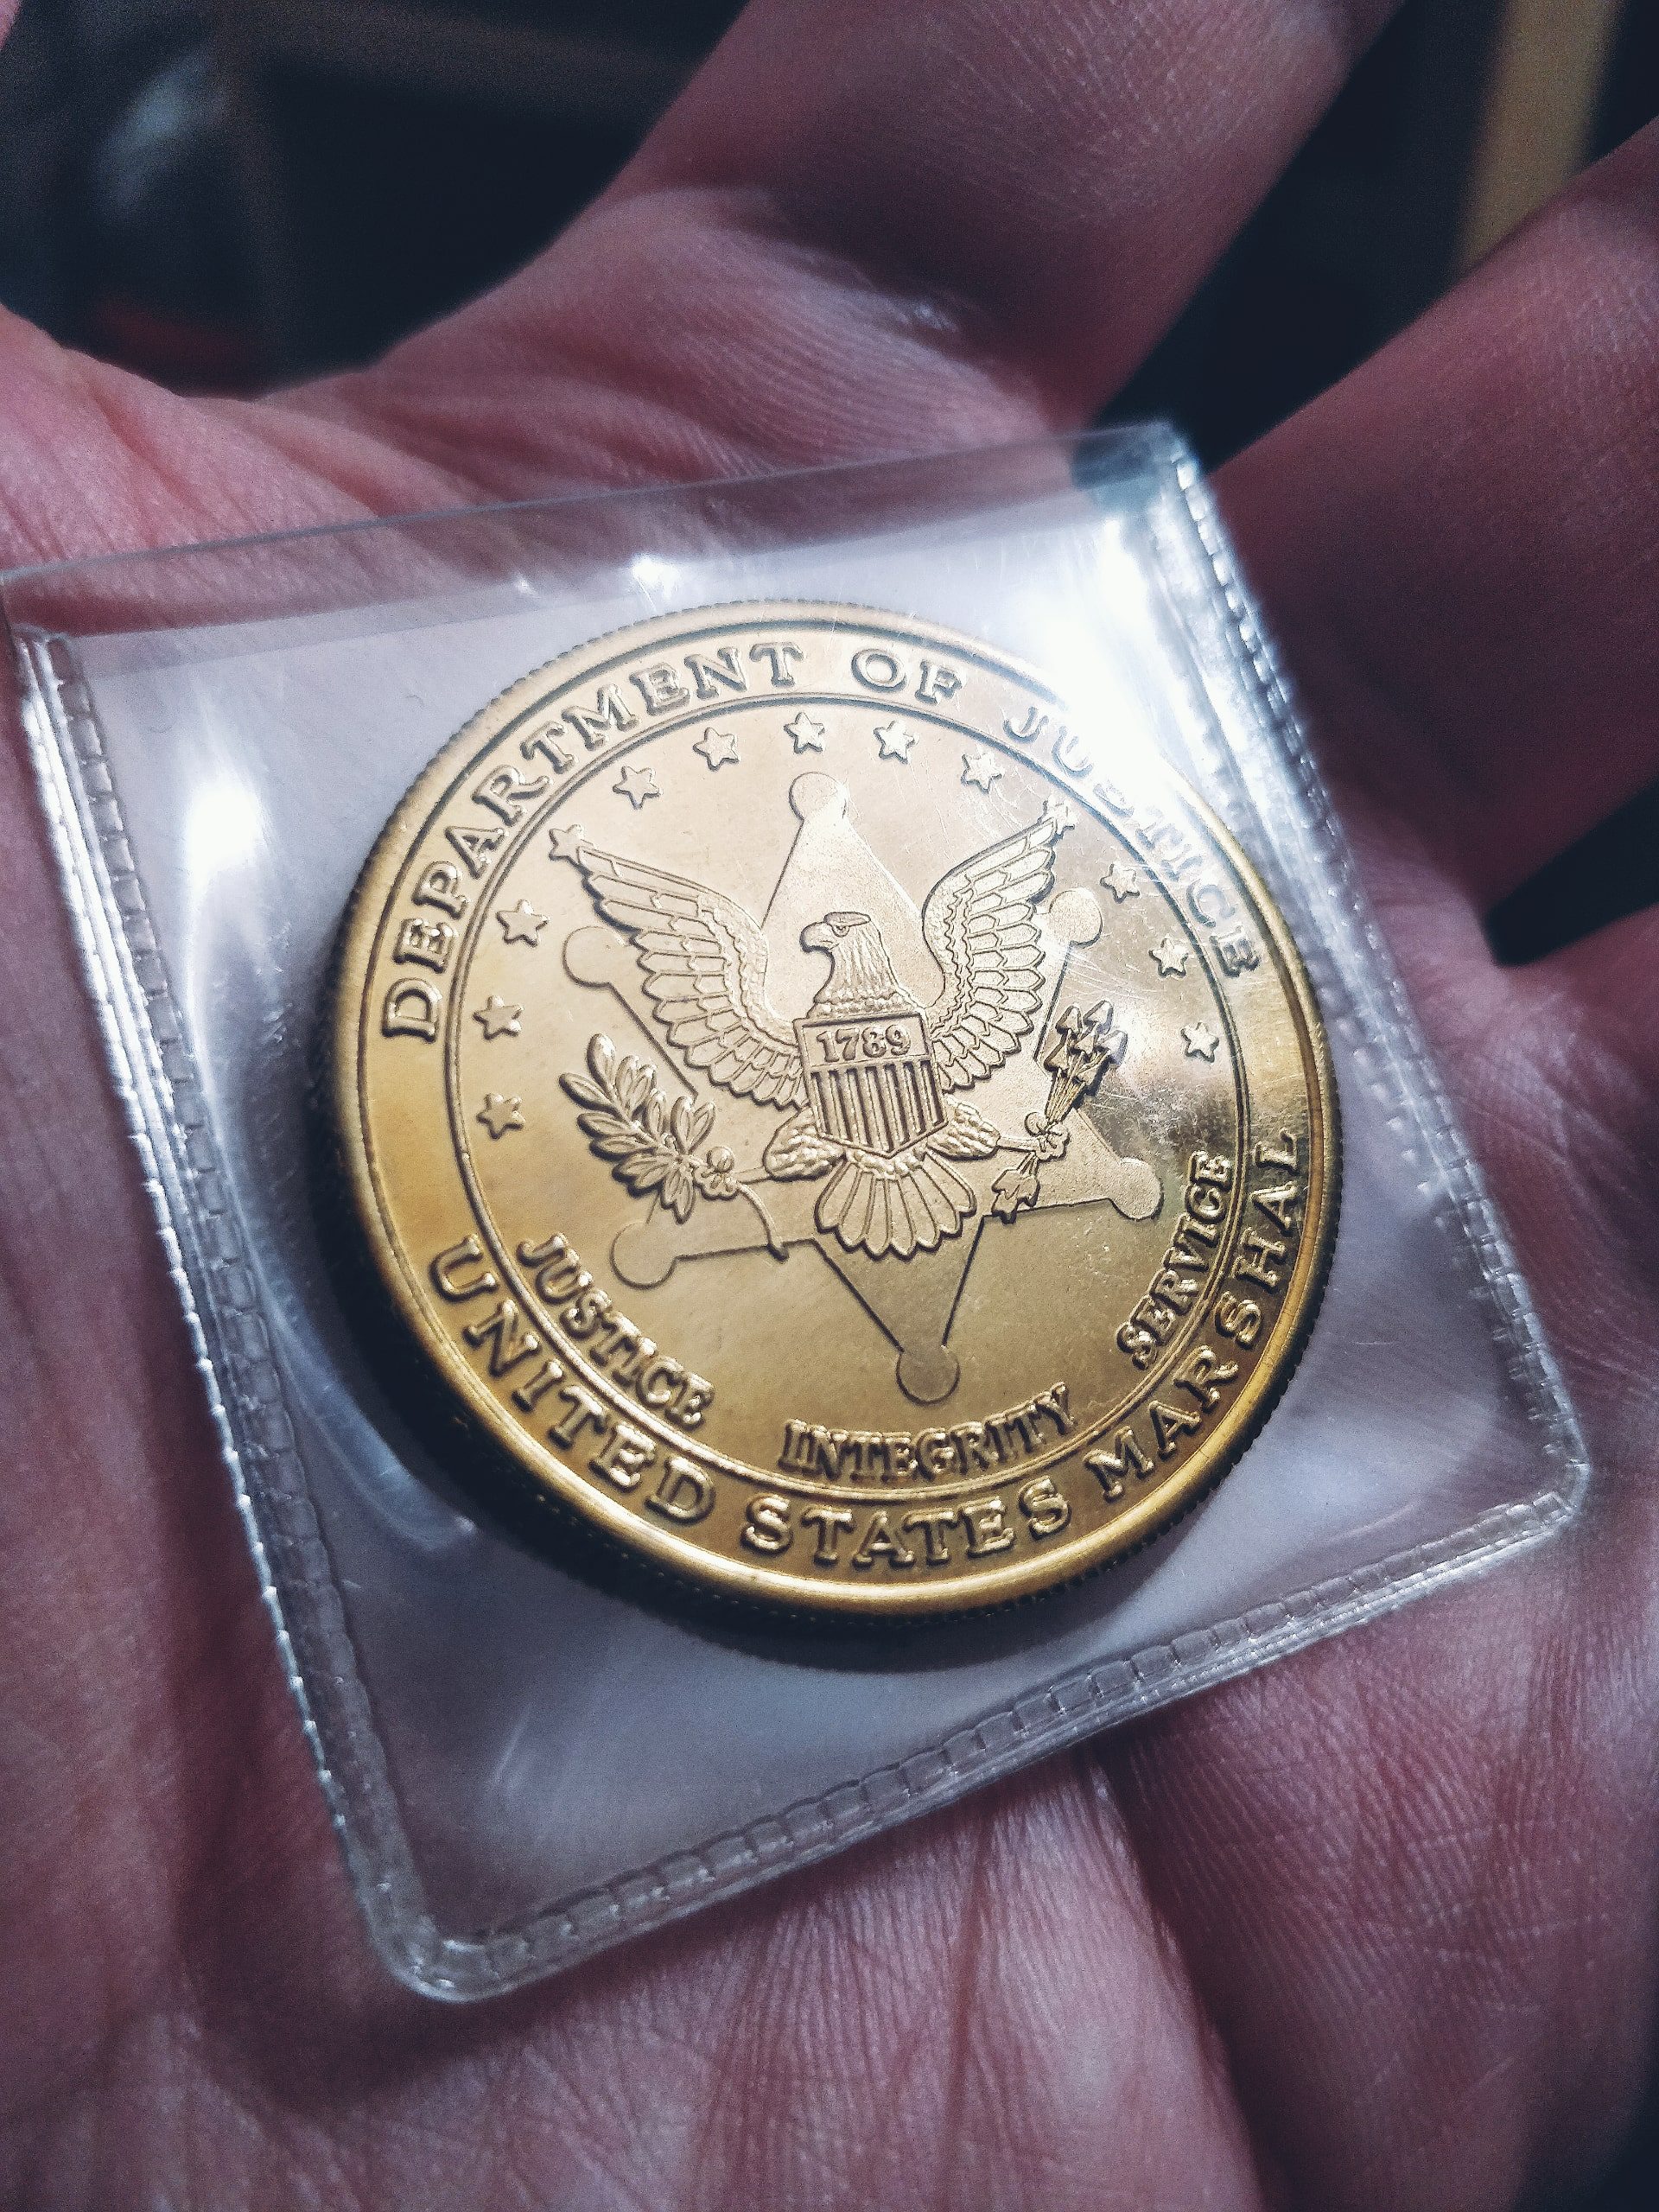 hand holding police challenge coin